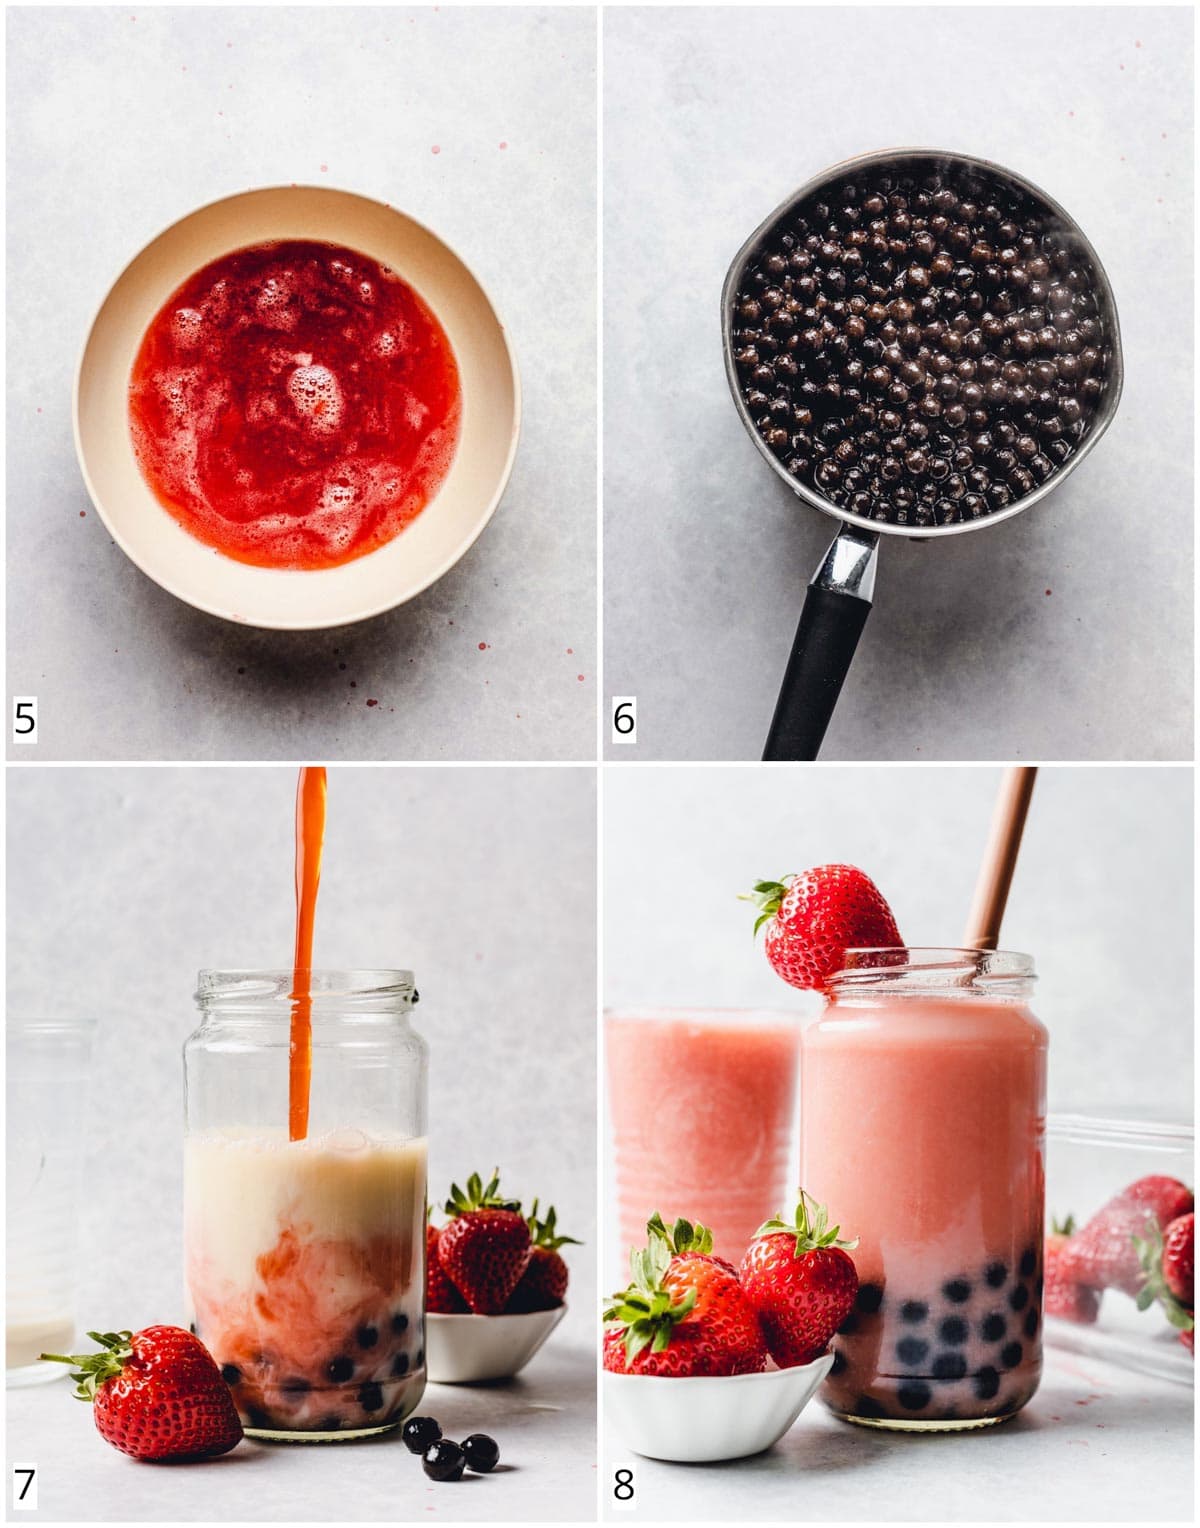 A collage of four images showing various steps in making strawberry bubble tea.